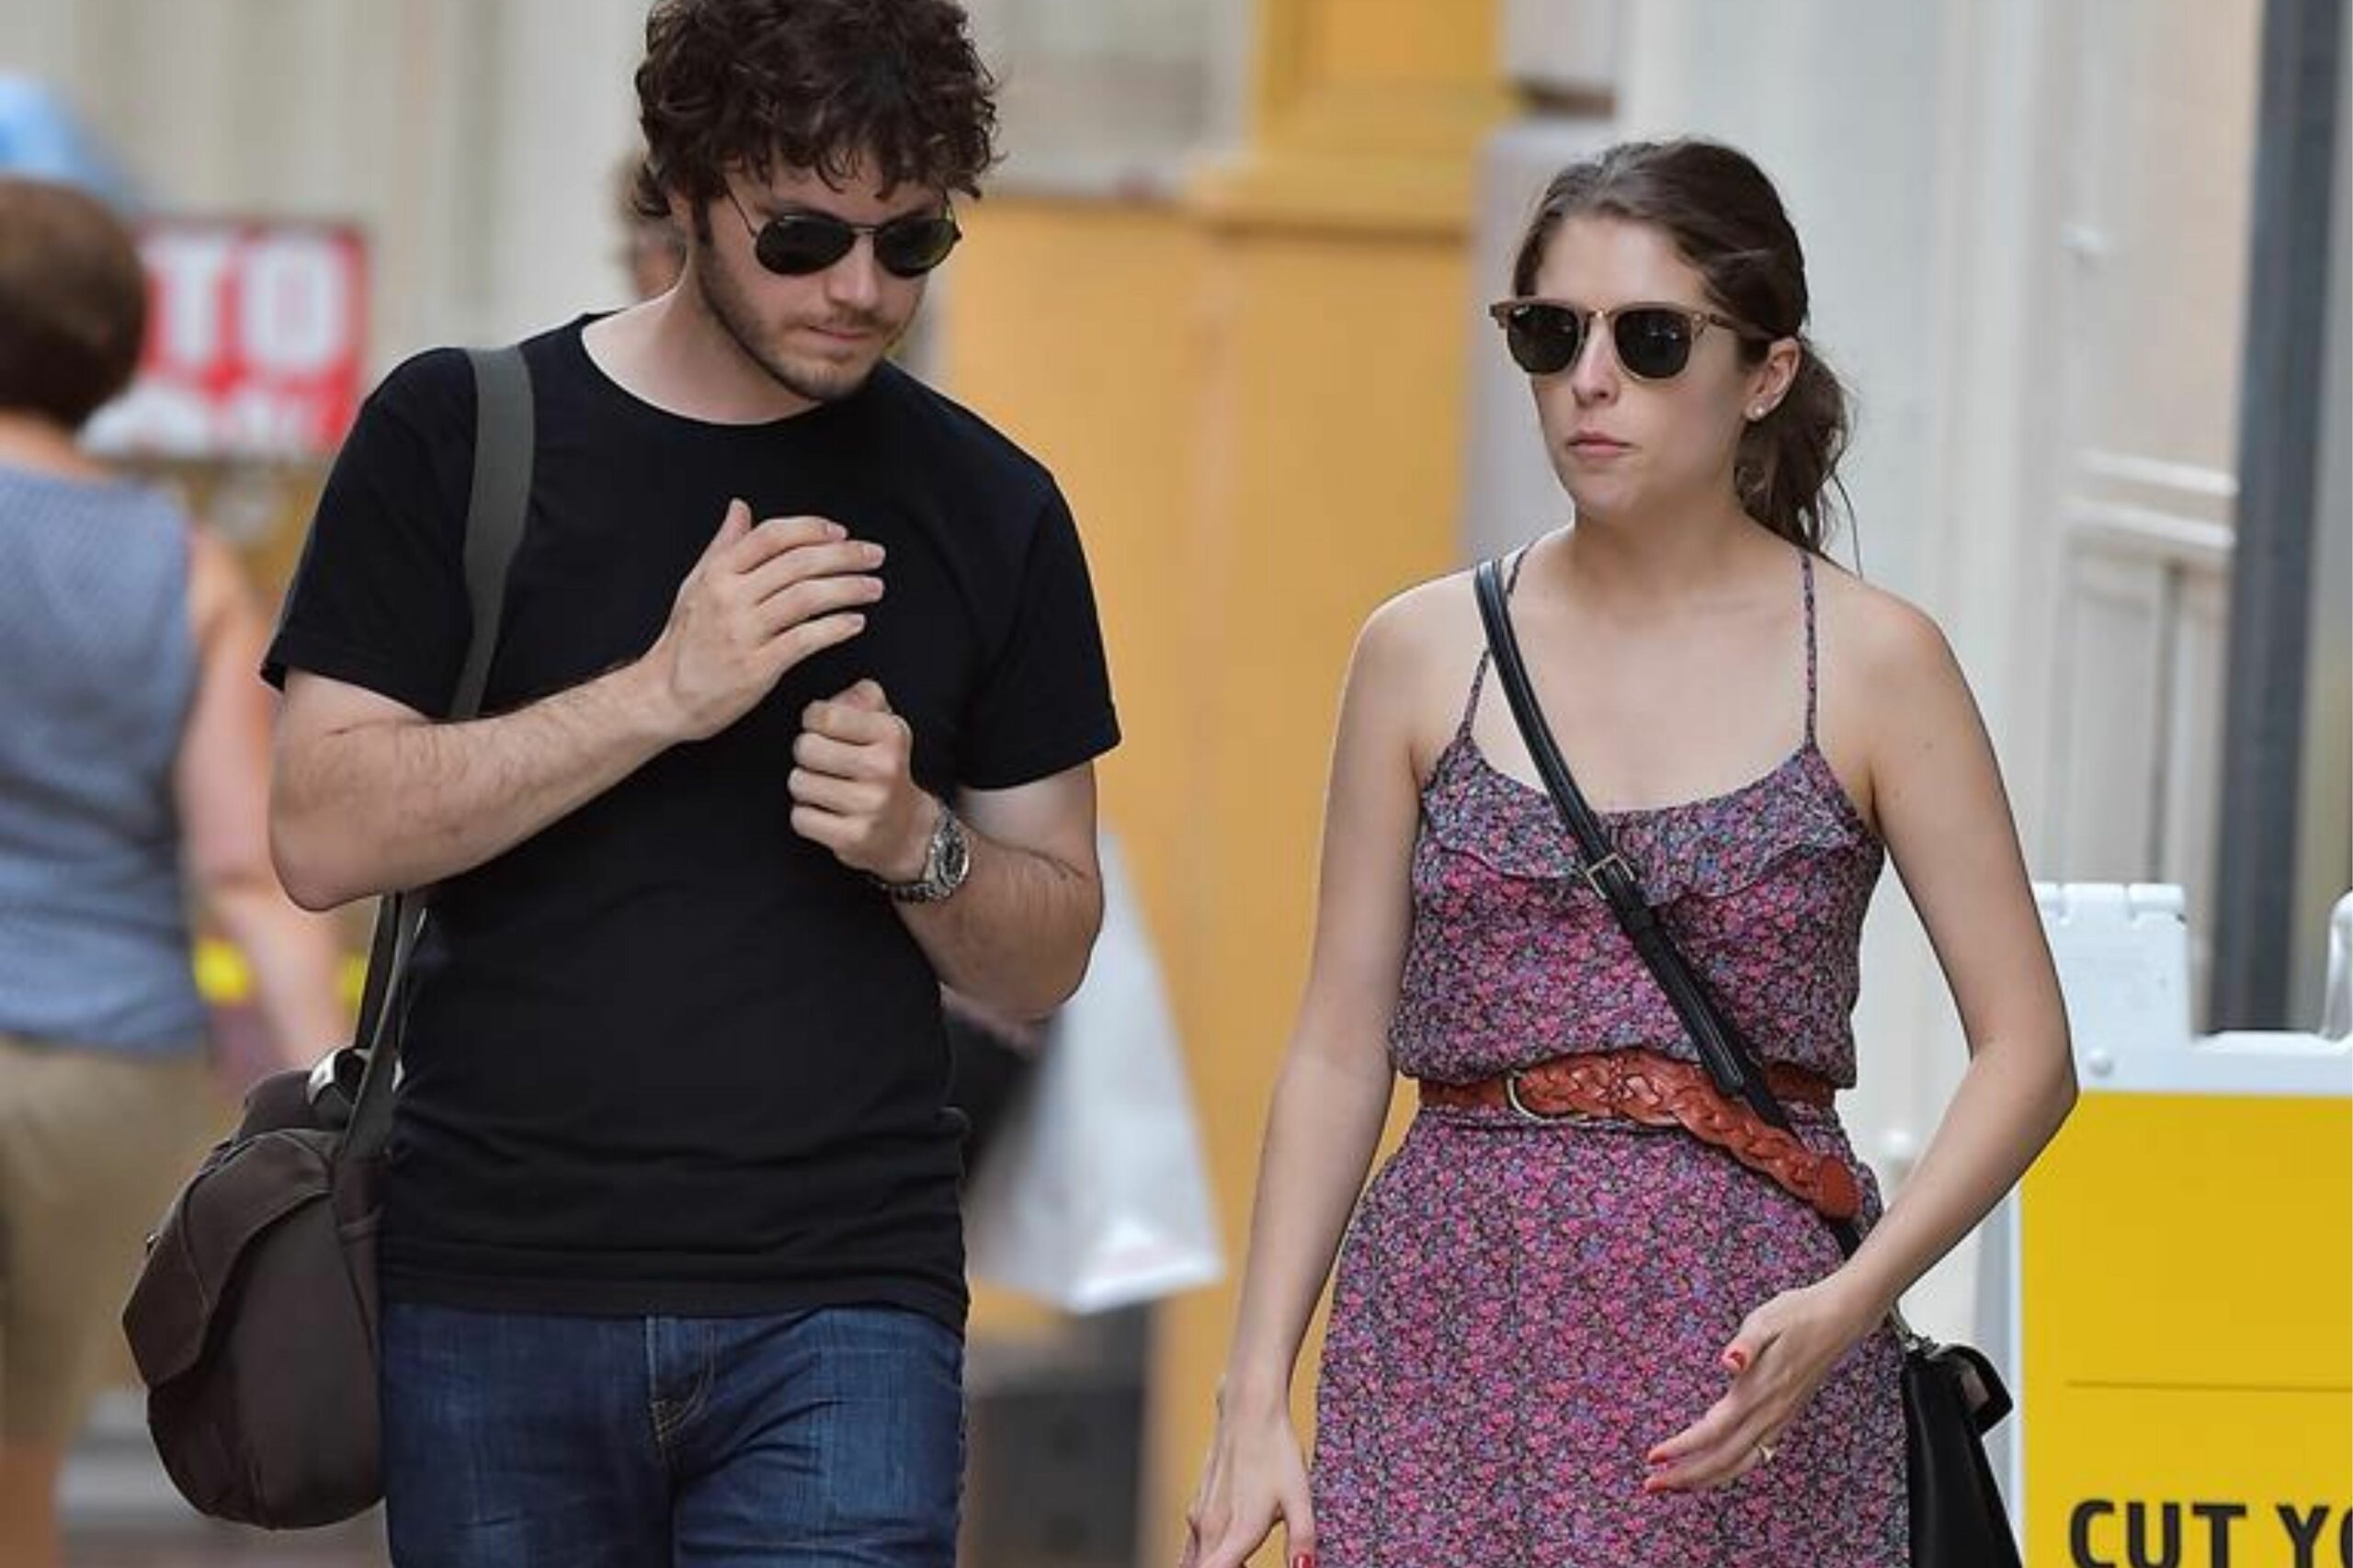 Who Is Anna Kendrick Dating Now? Why Anna Kendrick And Bill Hader Split After Year Of Dating?